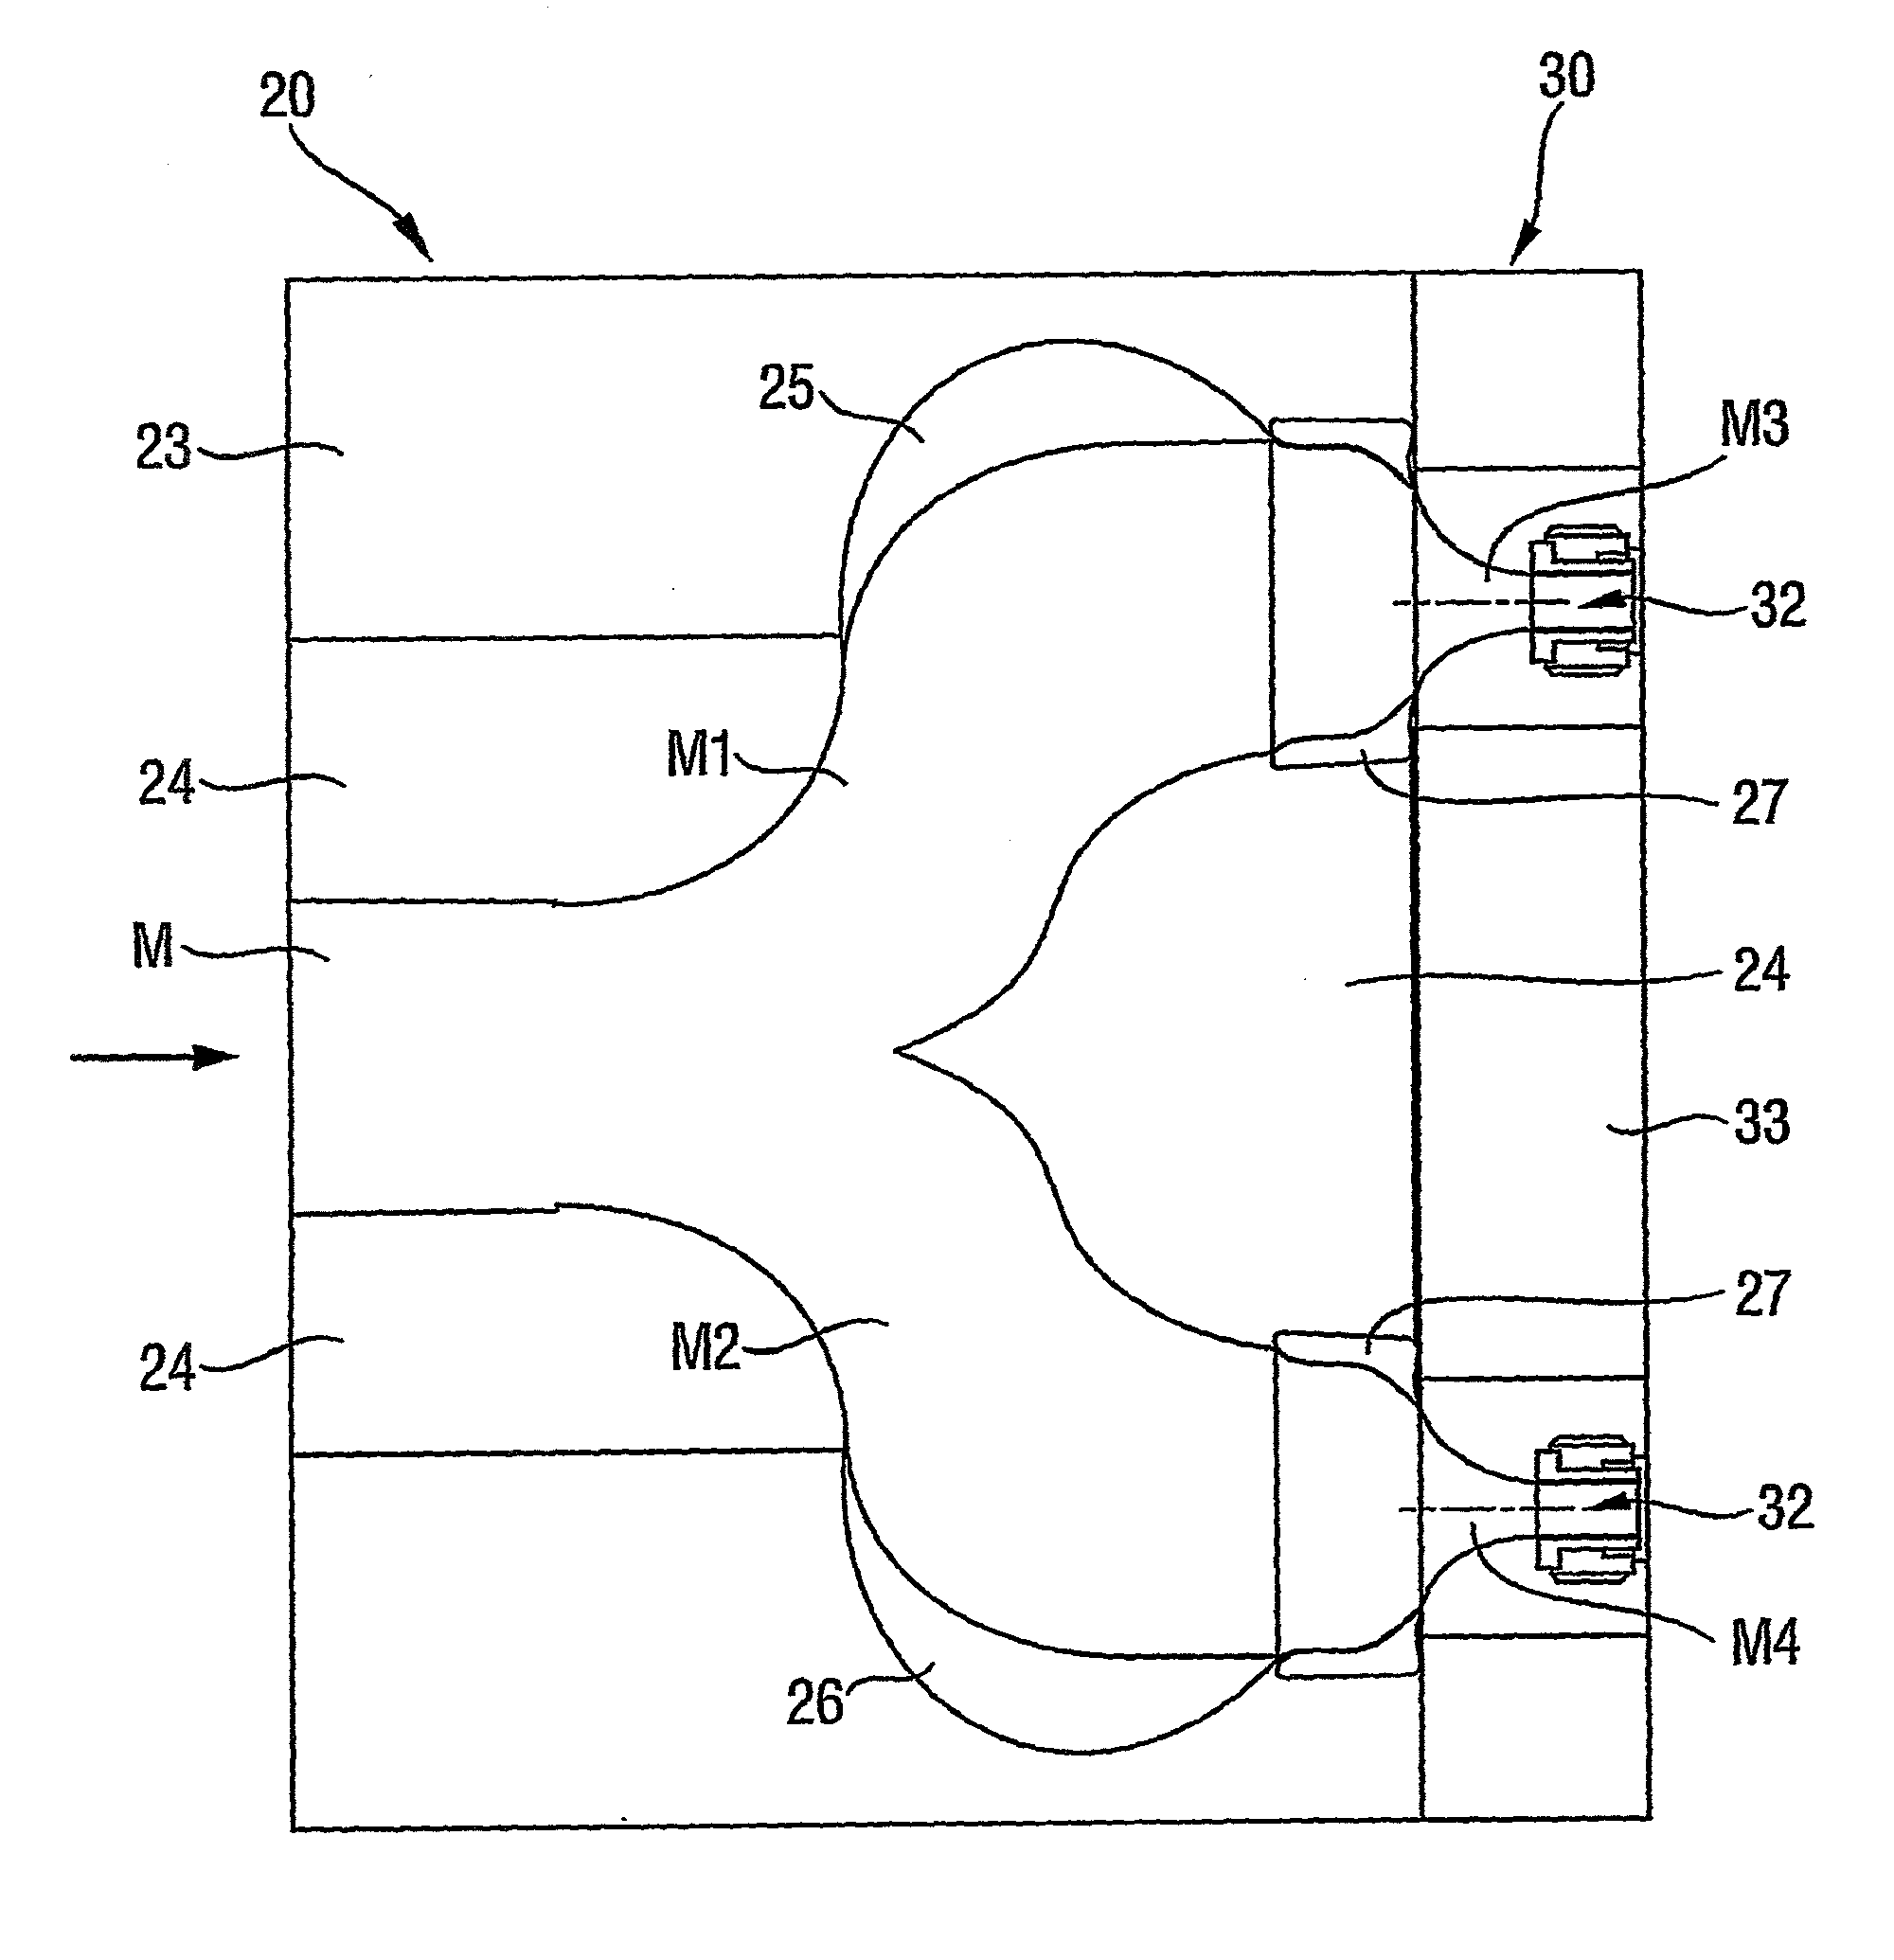 Device and method for the extrusion of viscoelastic materials